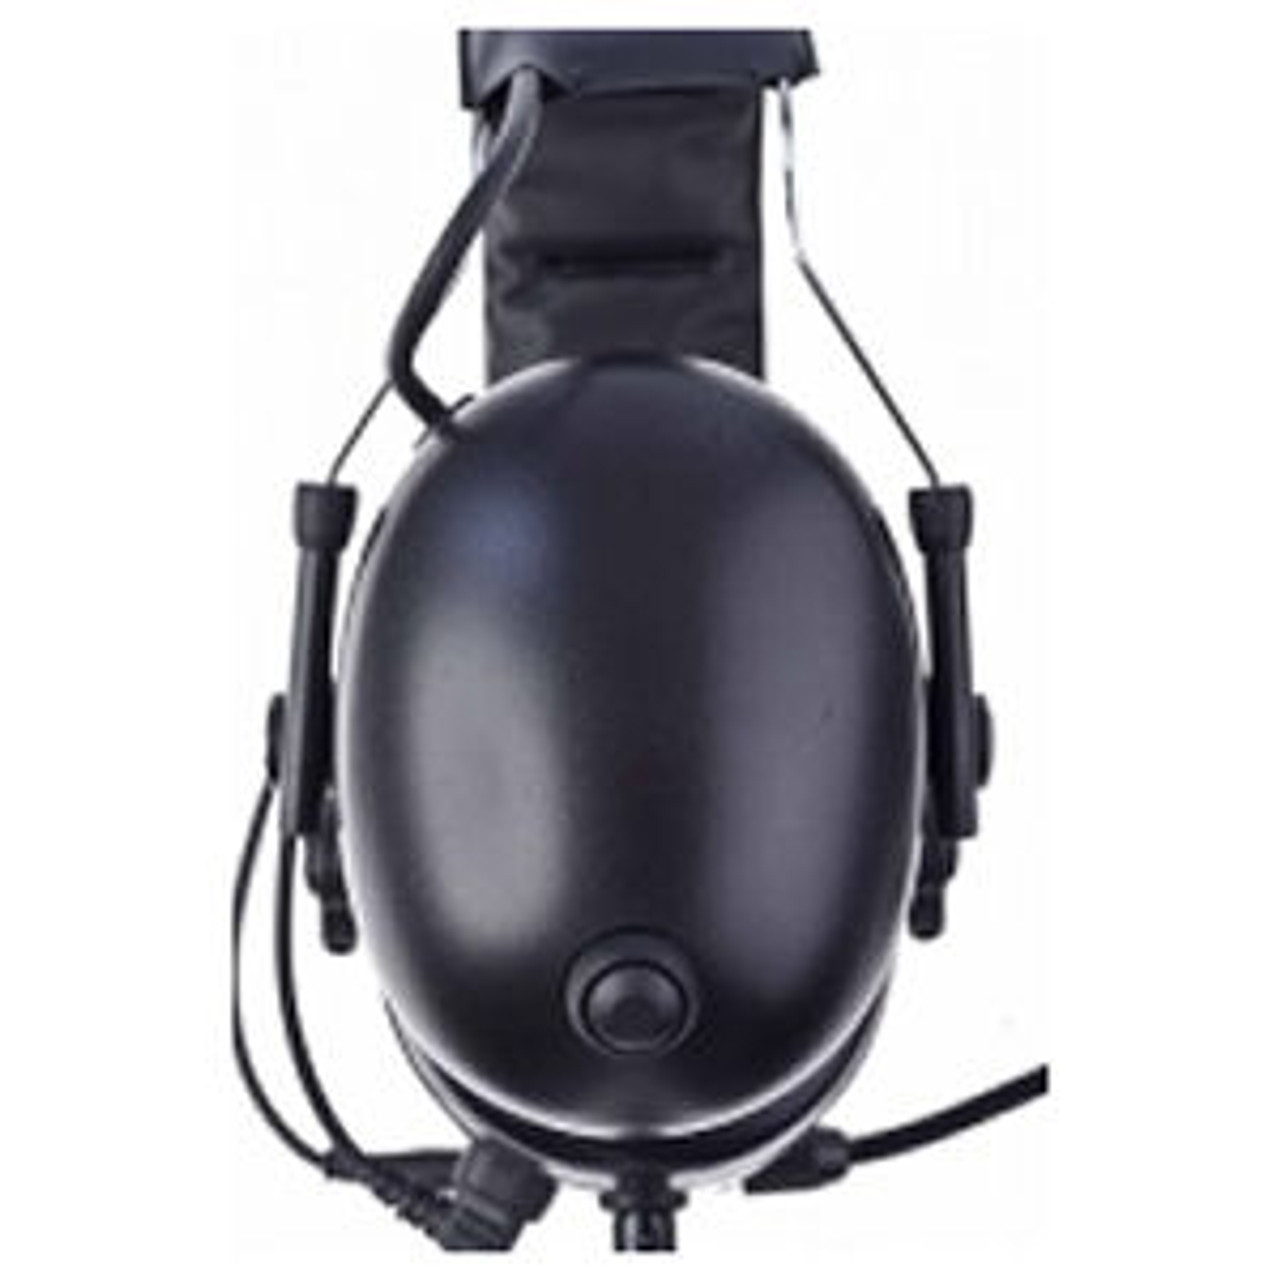 Kenwood TH-D72A Over The Head Double Muff Headset